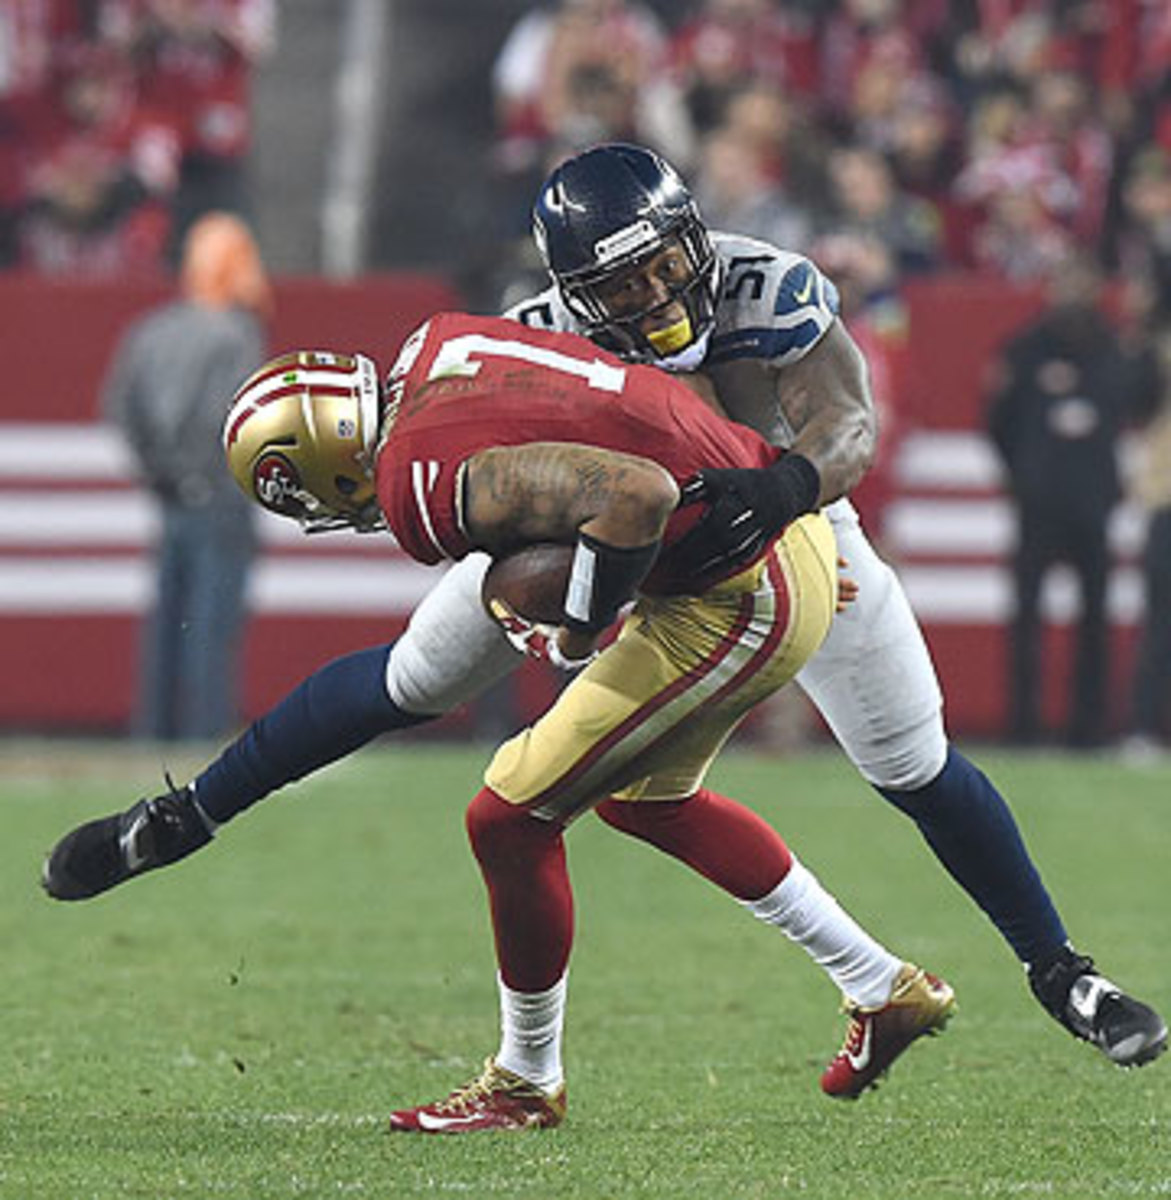 Bruce Irvin notched one of the Seahawks' four sacks of Colin Kaepernick on Thursday night. (Thearon W. Henderson/Getty Images)